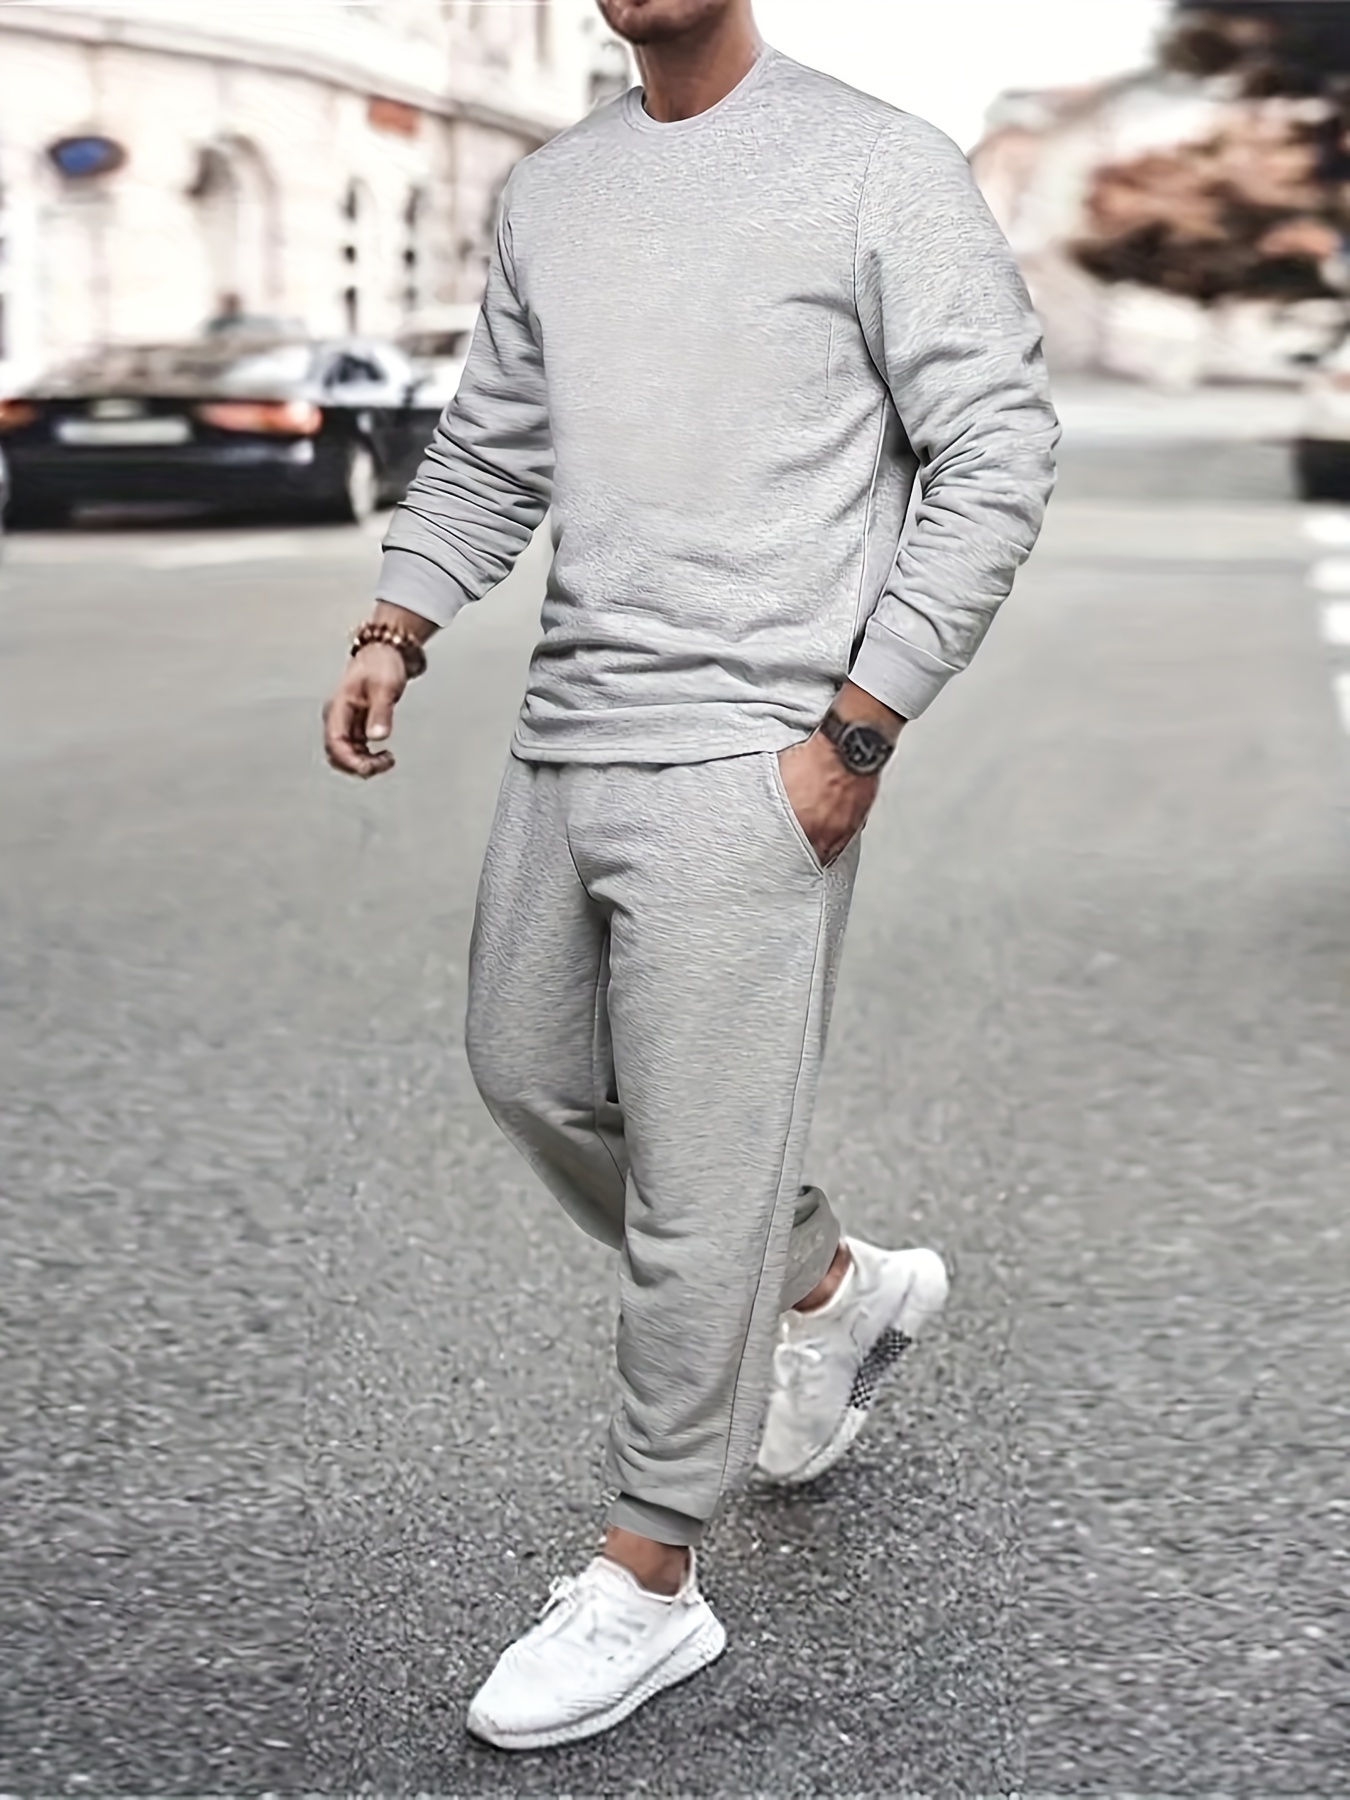 White Sweatpants Outfits For Men (71 ideas & outfits)